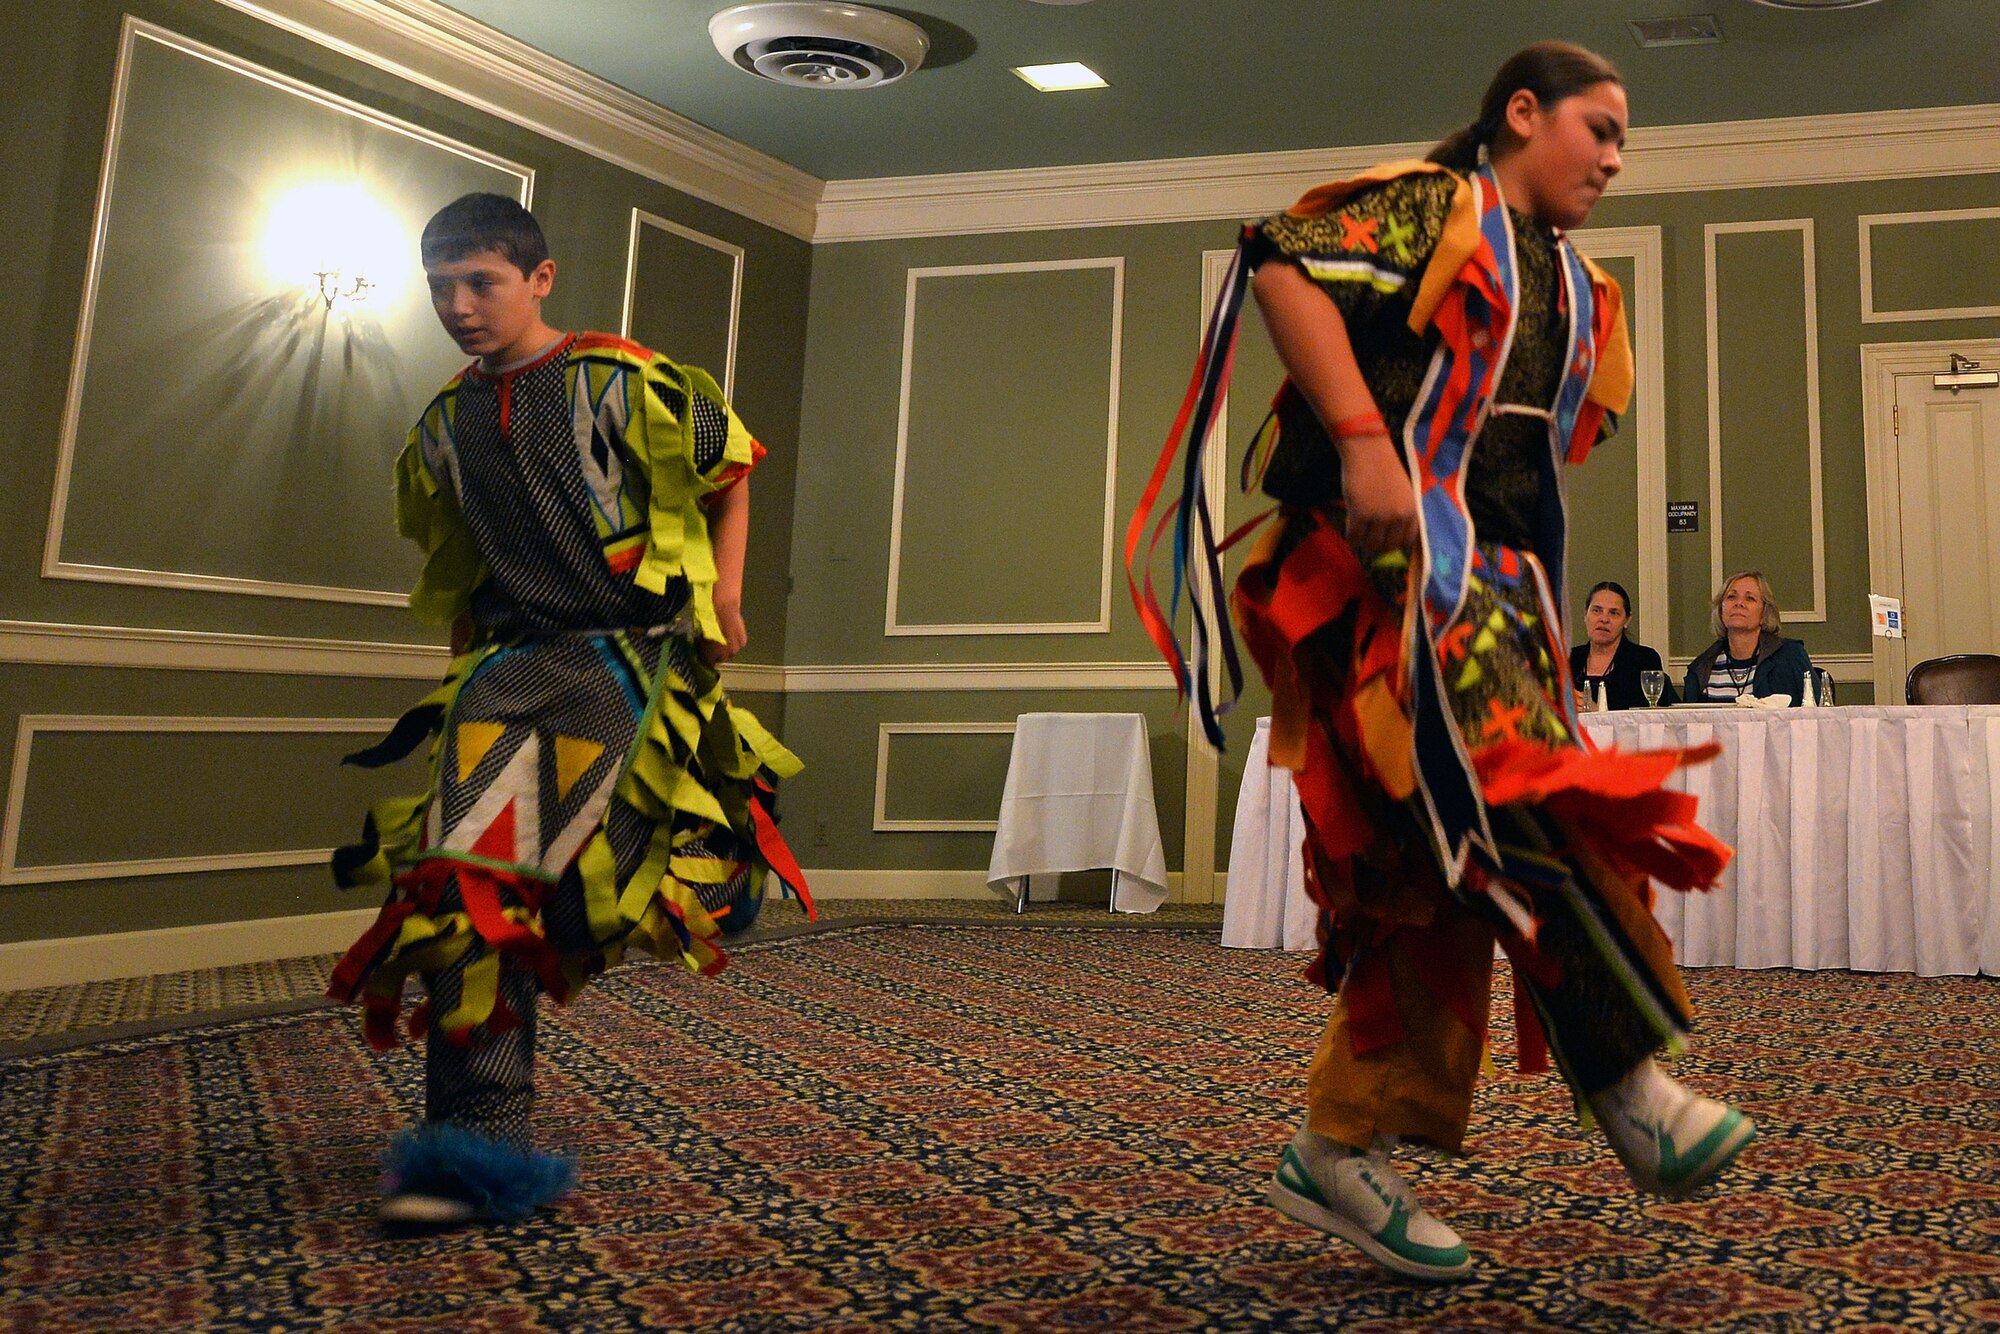 Diego Gill, left, and Carlos Sandoval perform the Men’s Grass dance Nov. 18, 2015, during the Native American Heritage Month Cultural Information Fair and Expo at the Patriot Club, Offutt Air Force Base, Neb. The dance was traditionally performed to flatten the grass and make room for other dances. (U.S. Air Force photo by Josh Plueger)